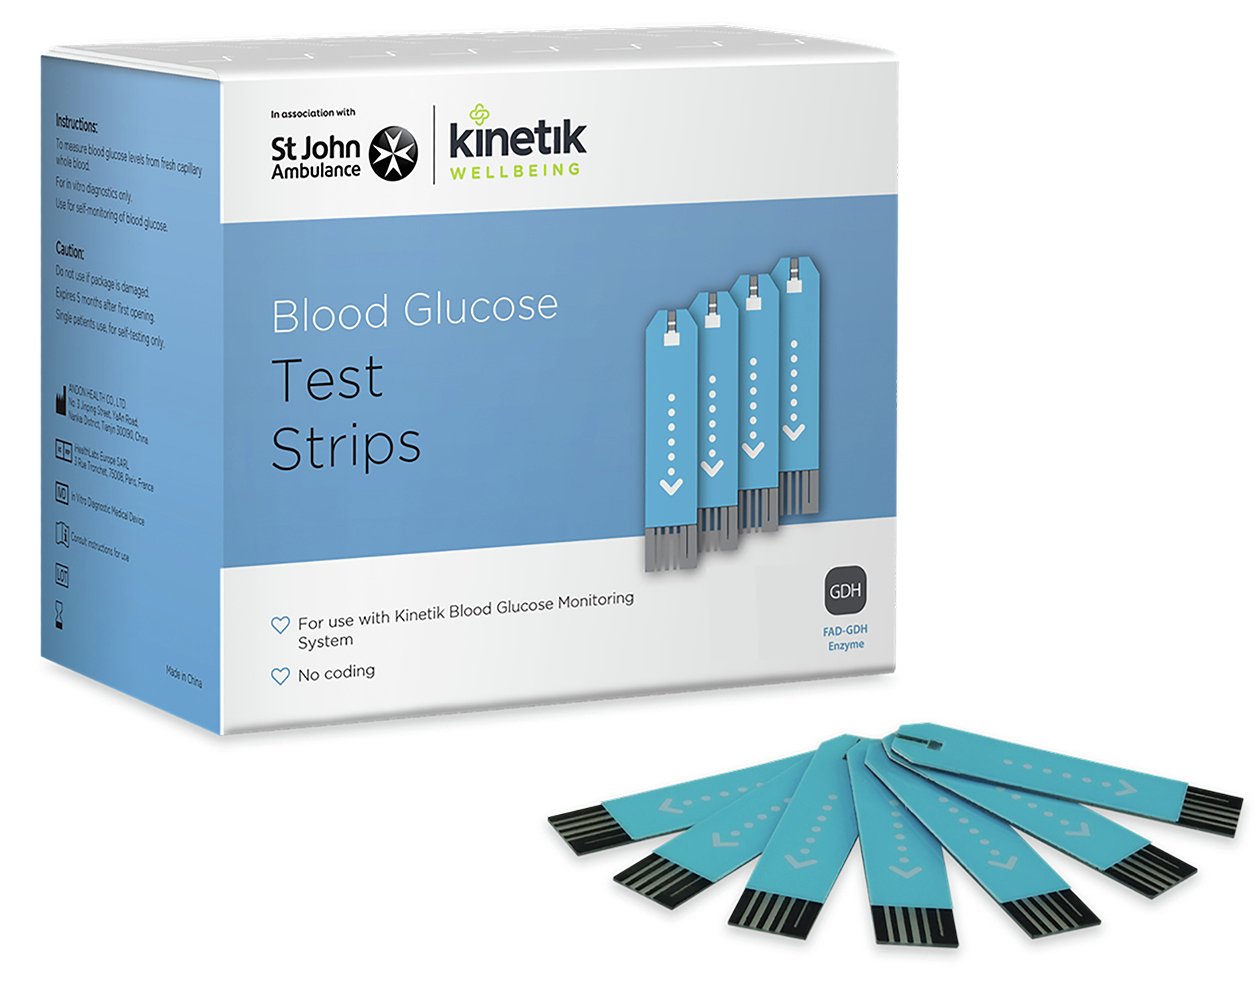 Kinetik Wellbeing Blood Glucose Test Strips review